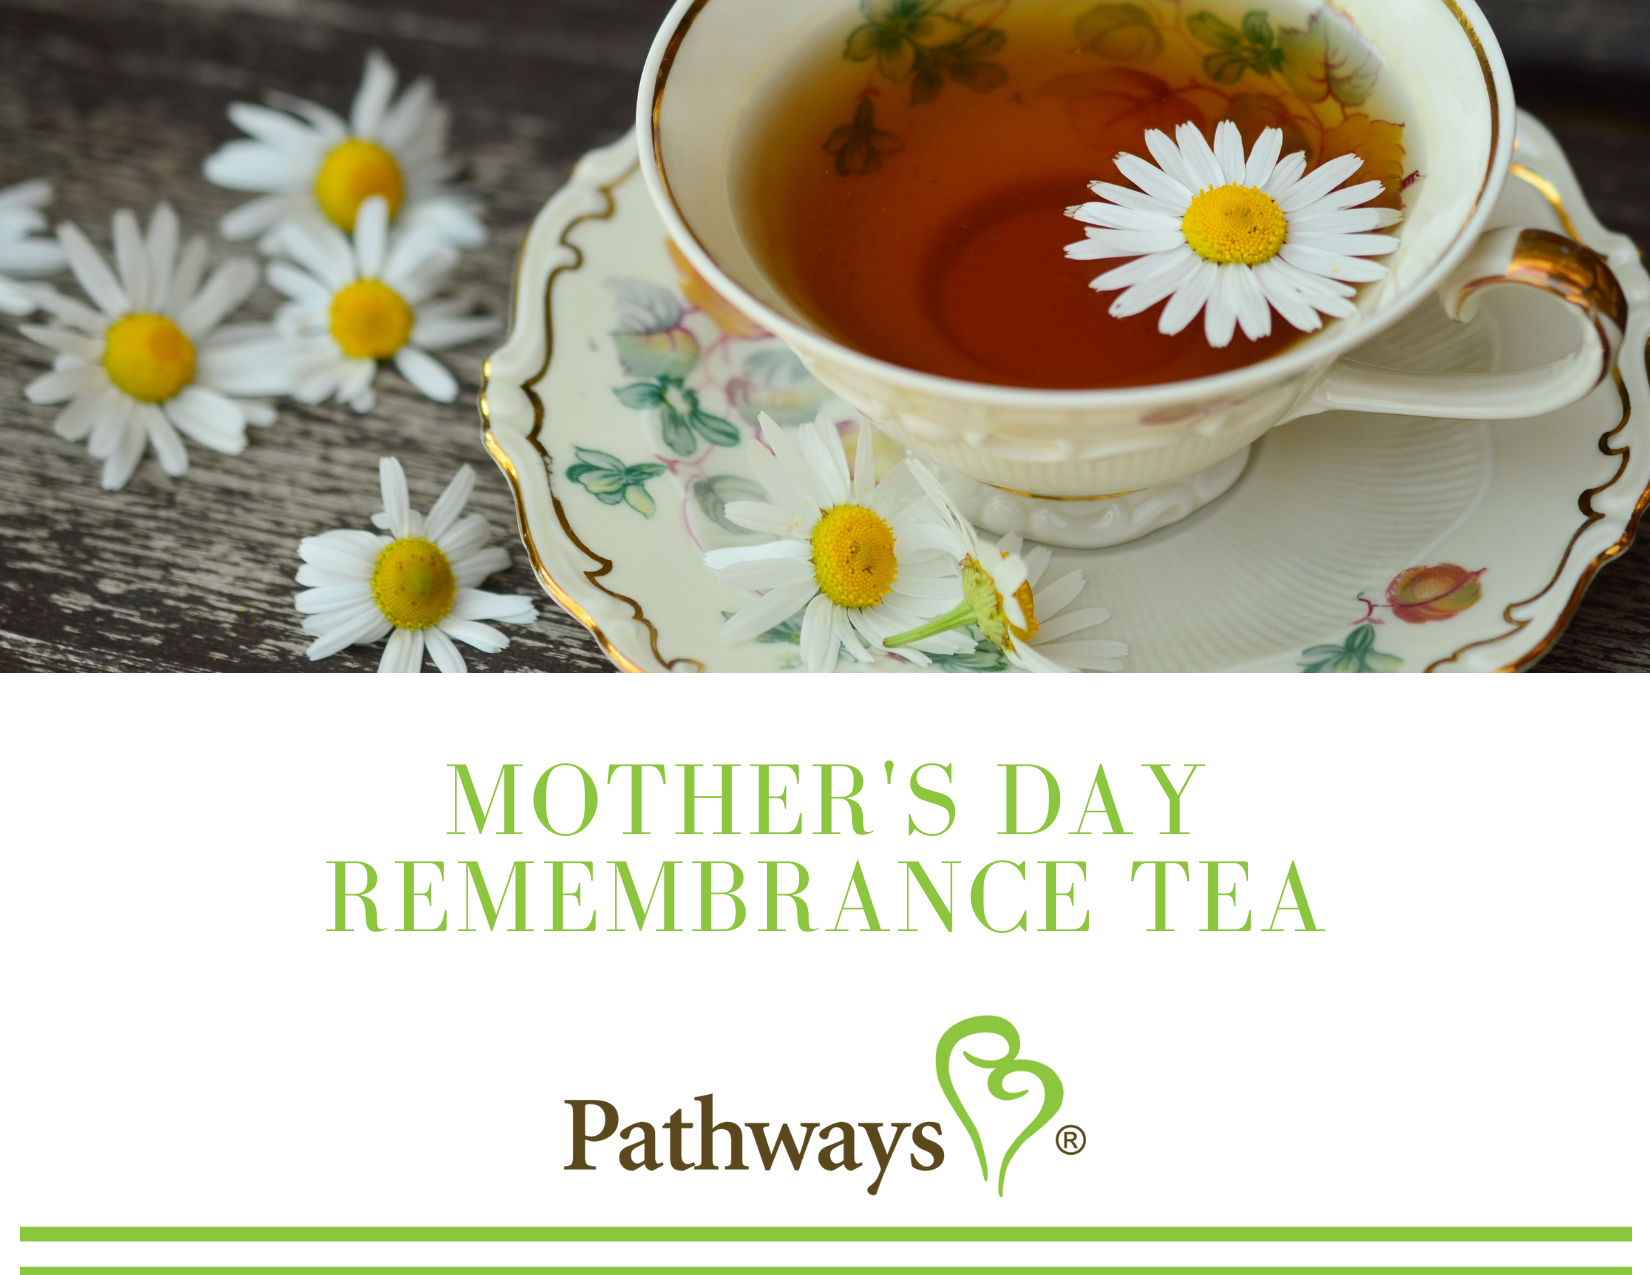 Mother's Day Remembrance Tea